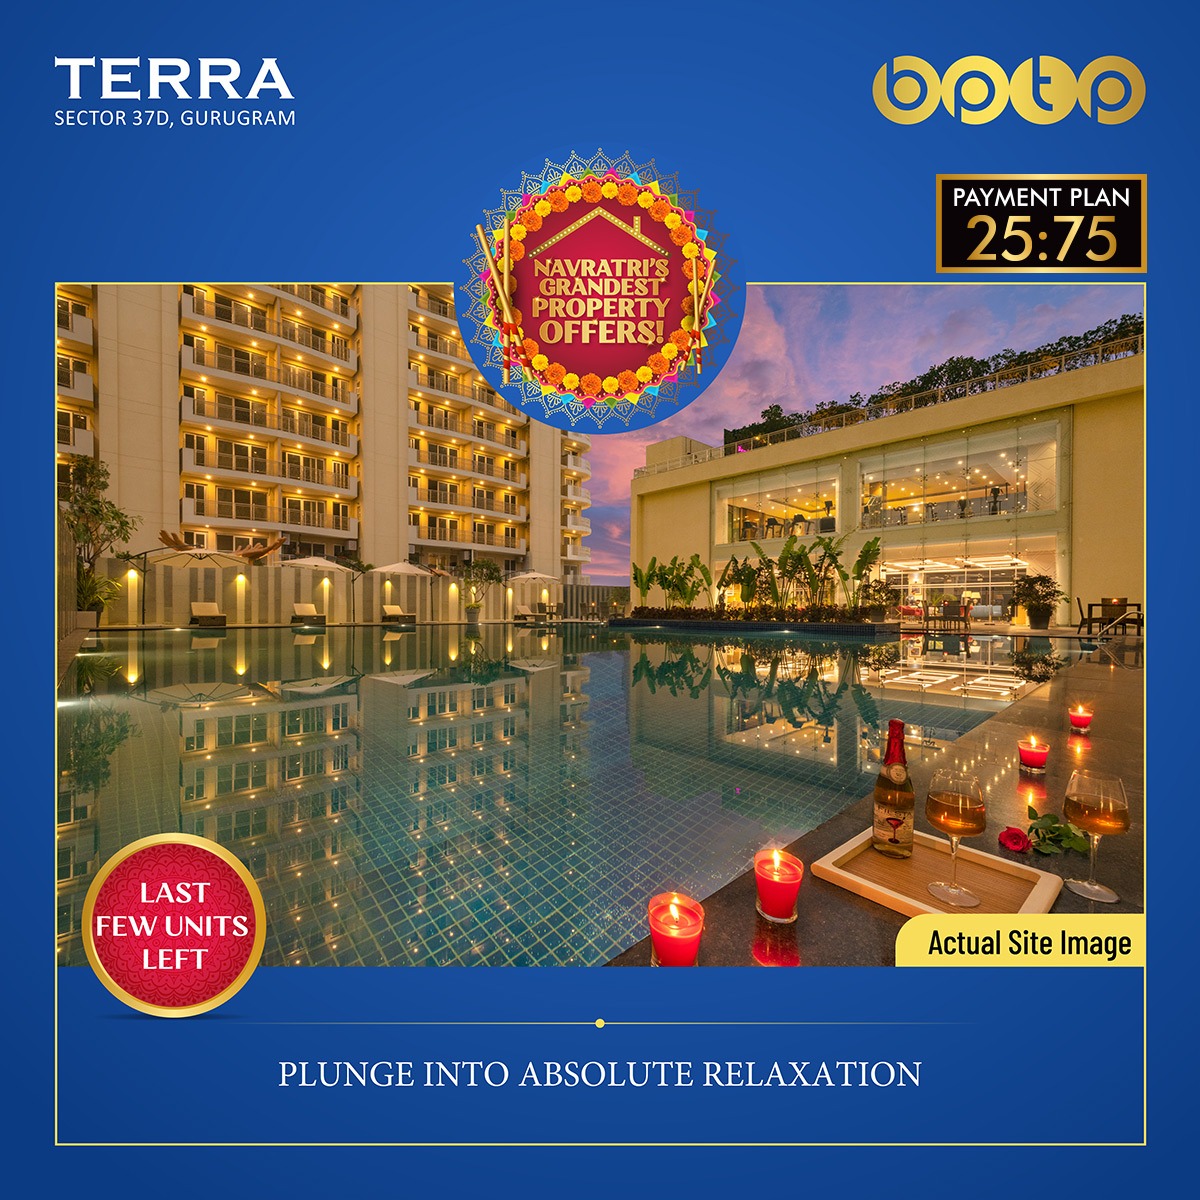 Navratri grandest property offers 25:75 payment plan at BPTP Terra in Sector 37D, Gurgaon Update